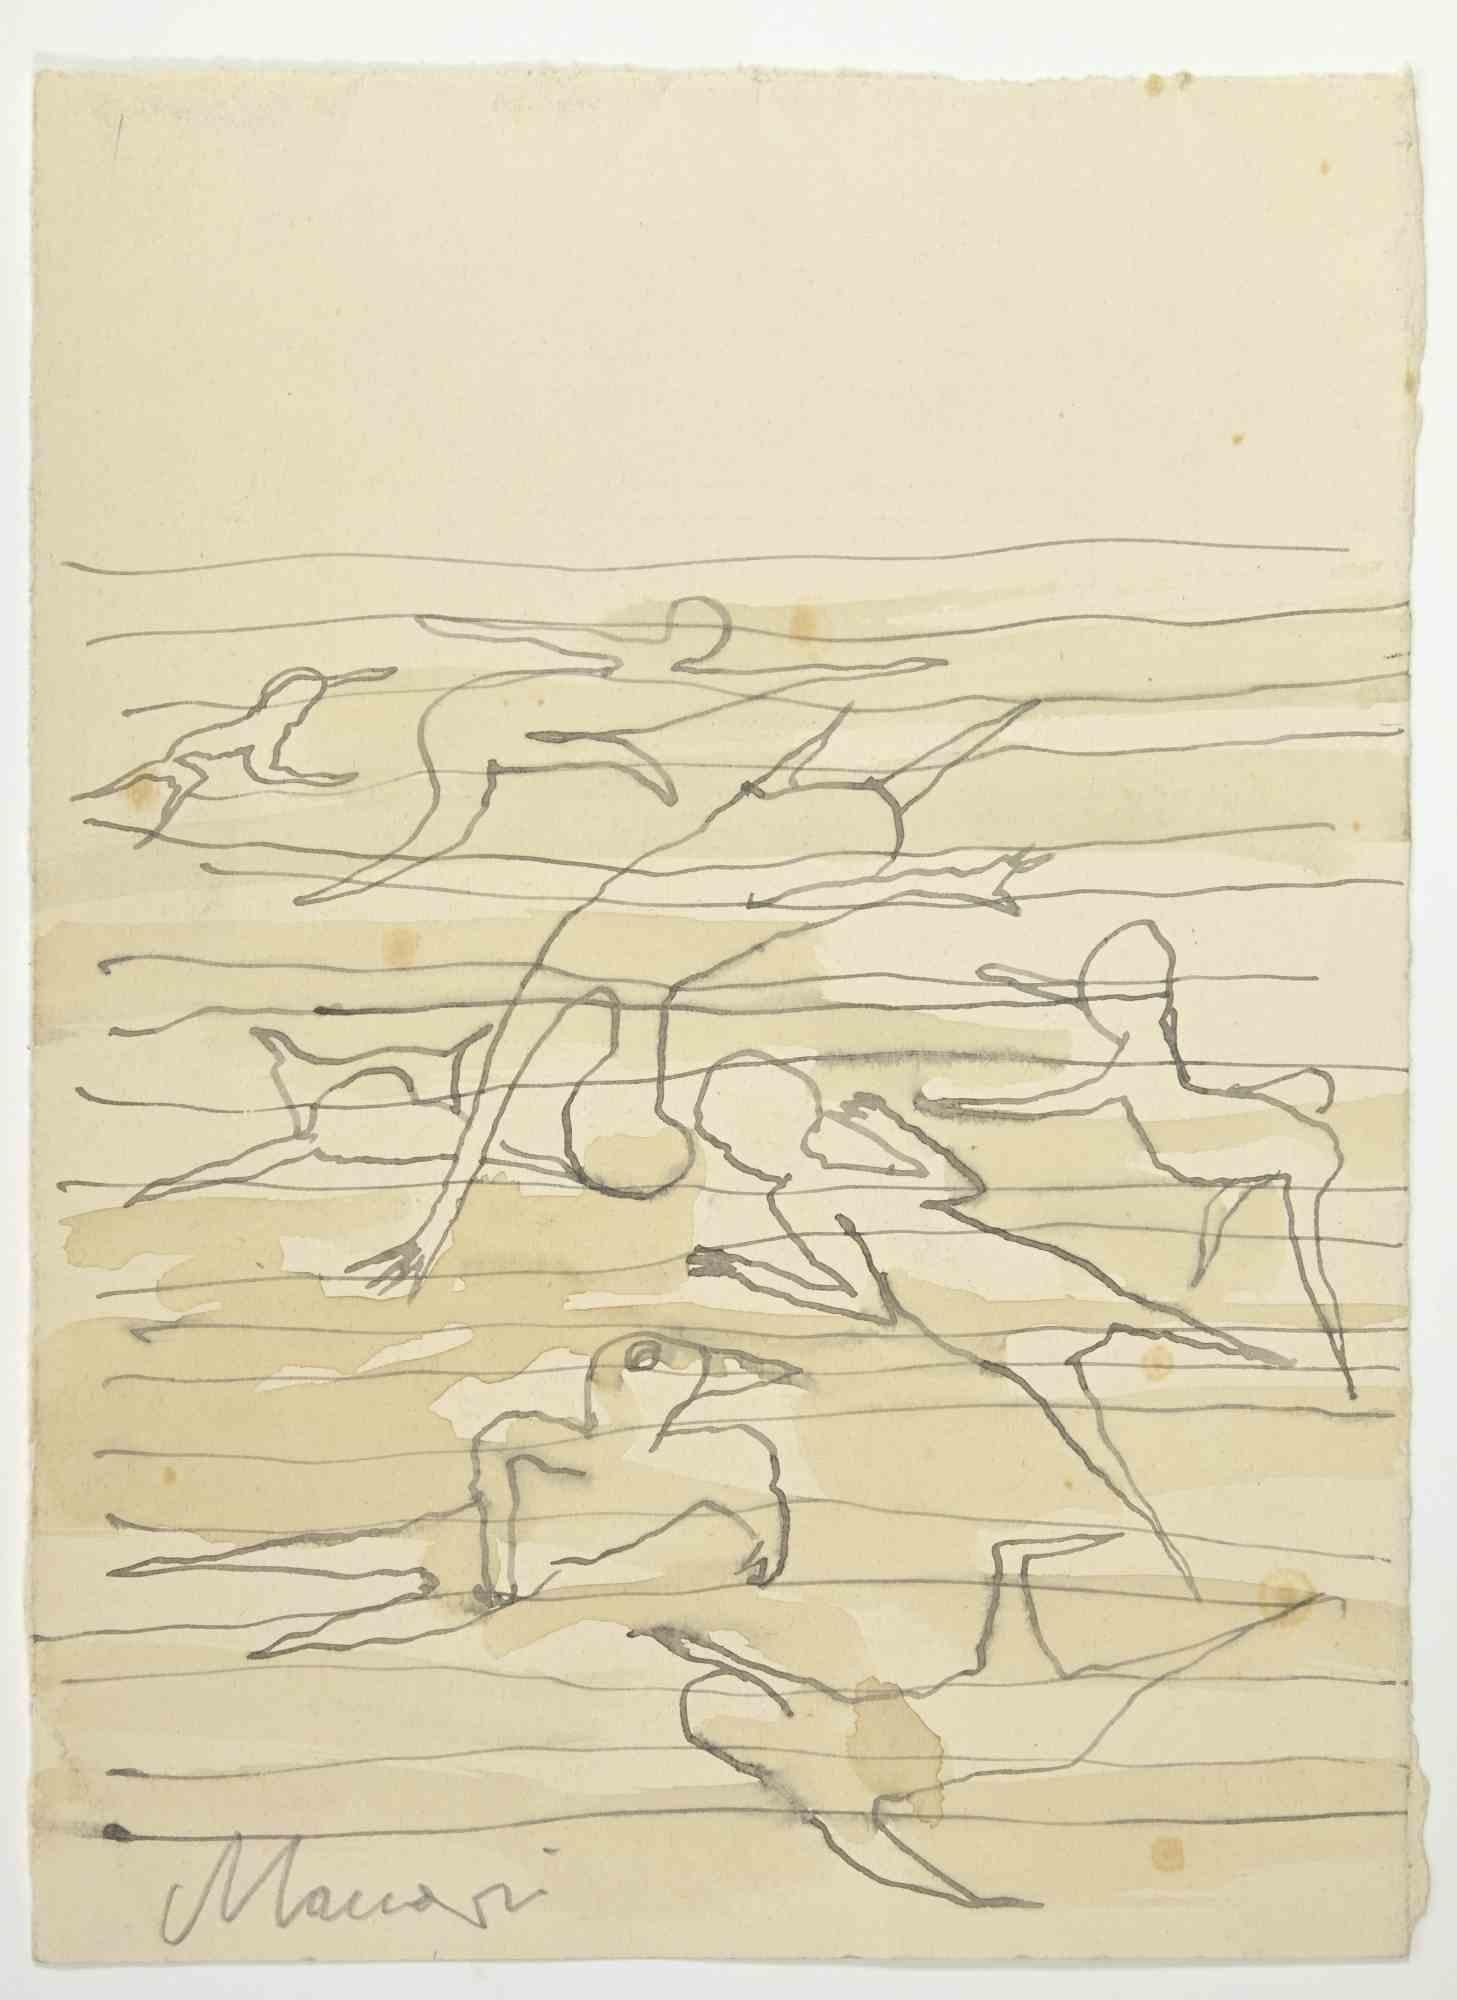 Swimmers is a China ink and watercolor Drawing realized by Mino Maccari  (1924-1989) in the 1960s.

Hand-signed on the lower.

Good condition with slight foxing.

Mino Maccari (Siena, 1924-Rome, June 16, 1989) was an Italian writer, painter,